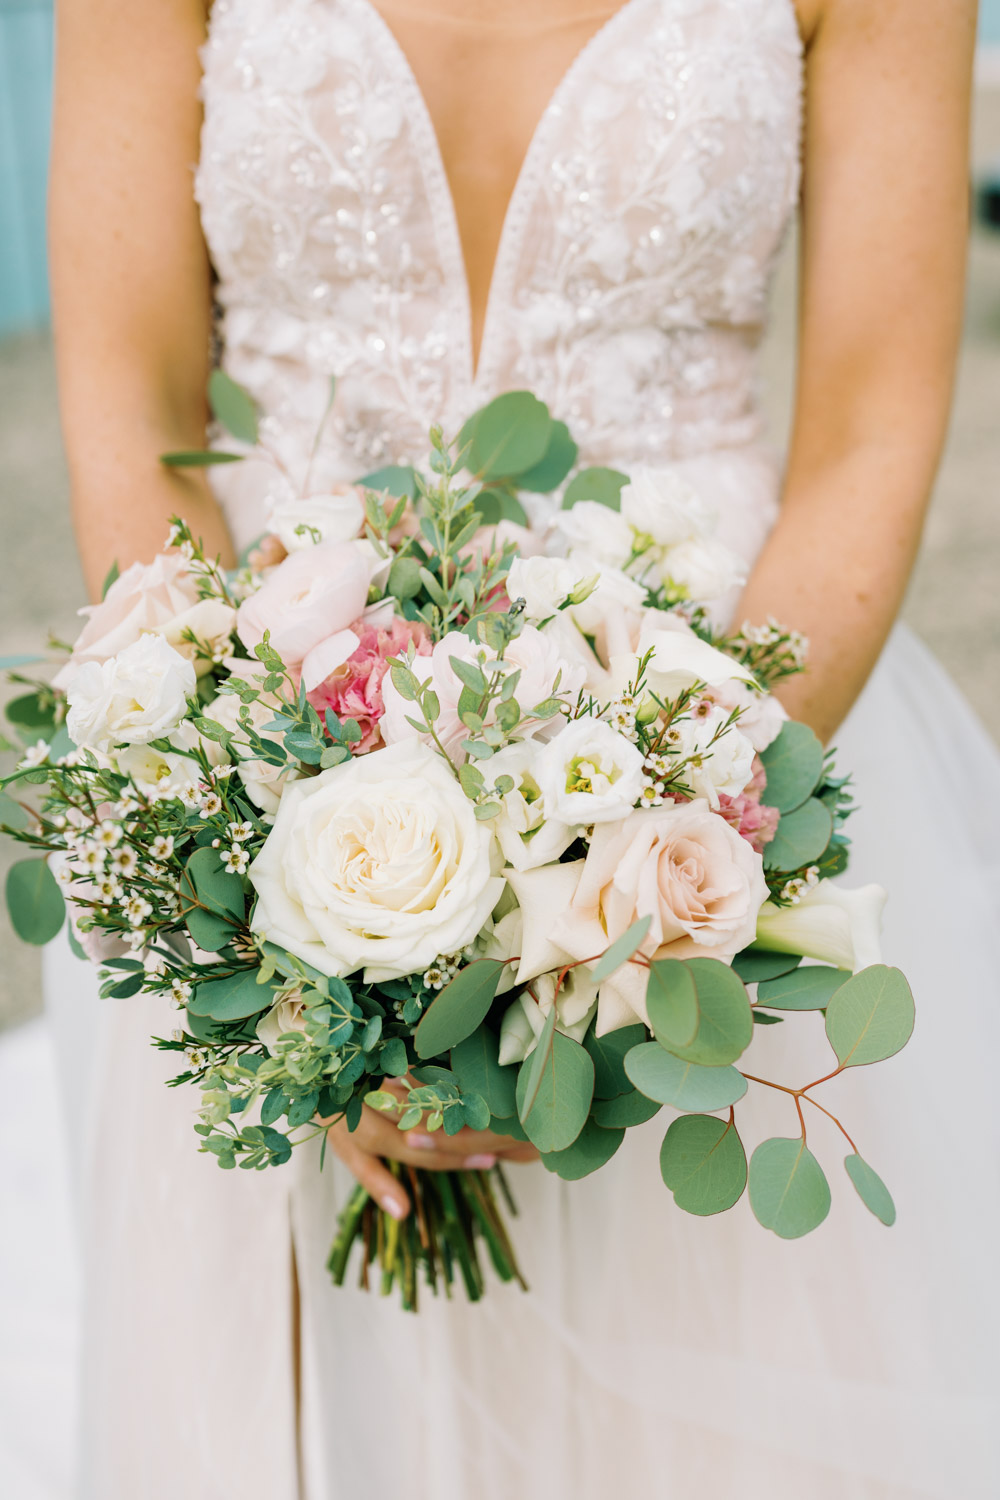 Bridal bouquet by Flowers for Dreams